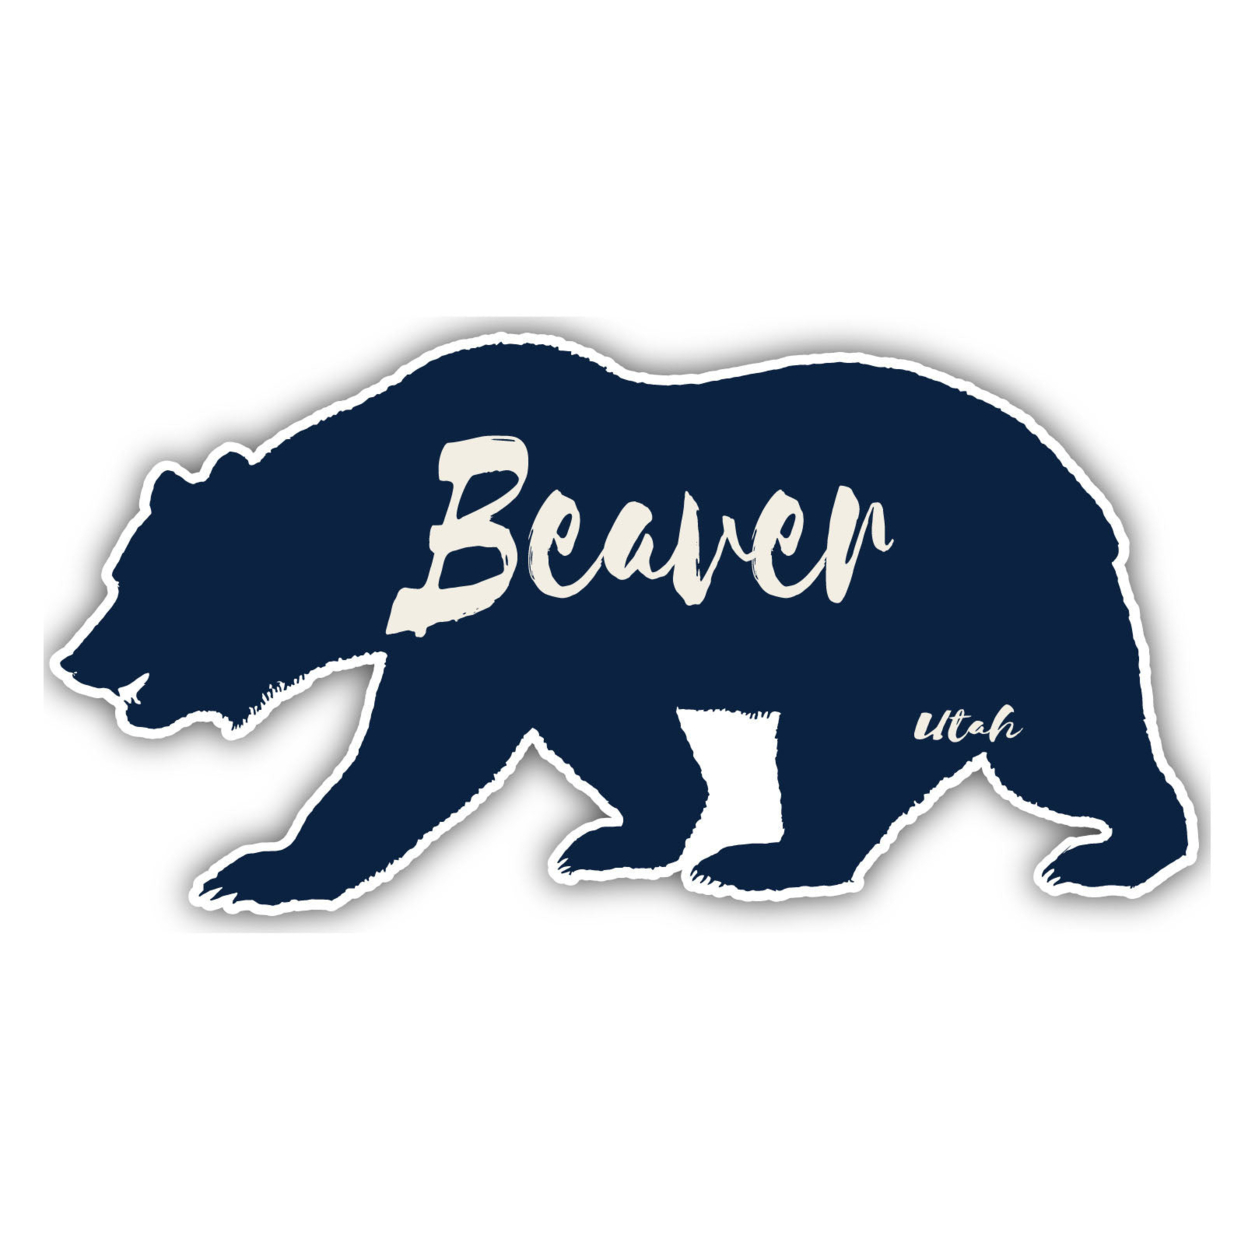 Beaver Utah Souvenir Decorative Stickers (Choose Theme And Size) - 4-Pack, 2-Inch, Adventures Awaits